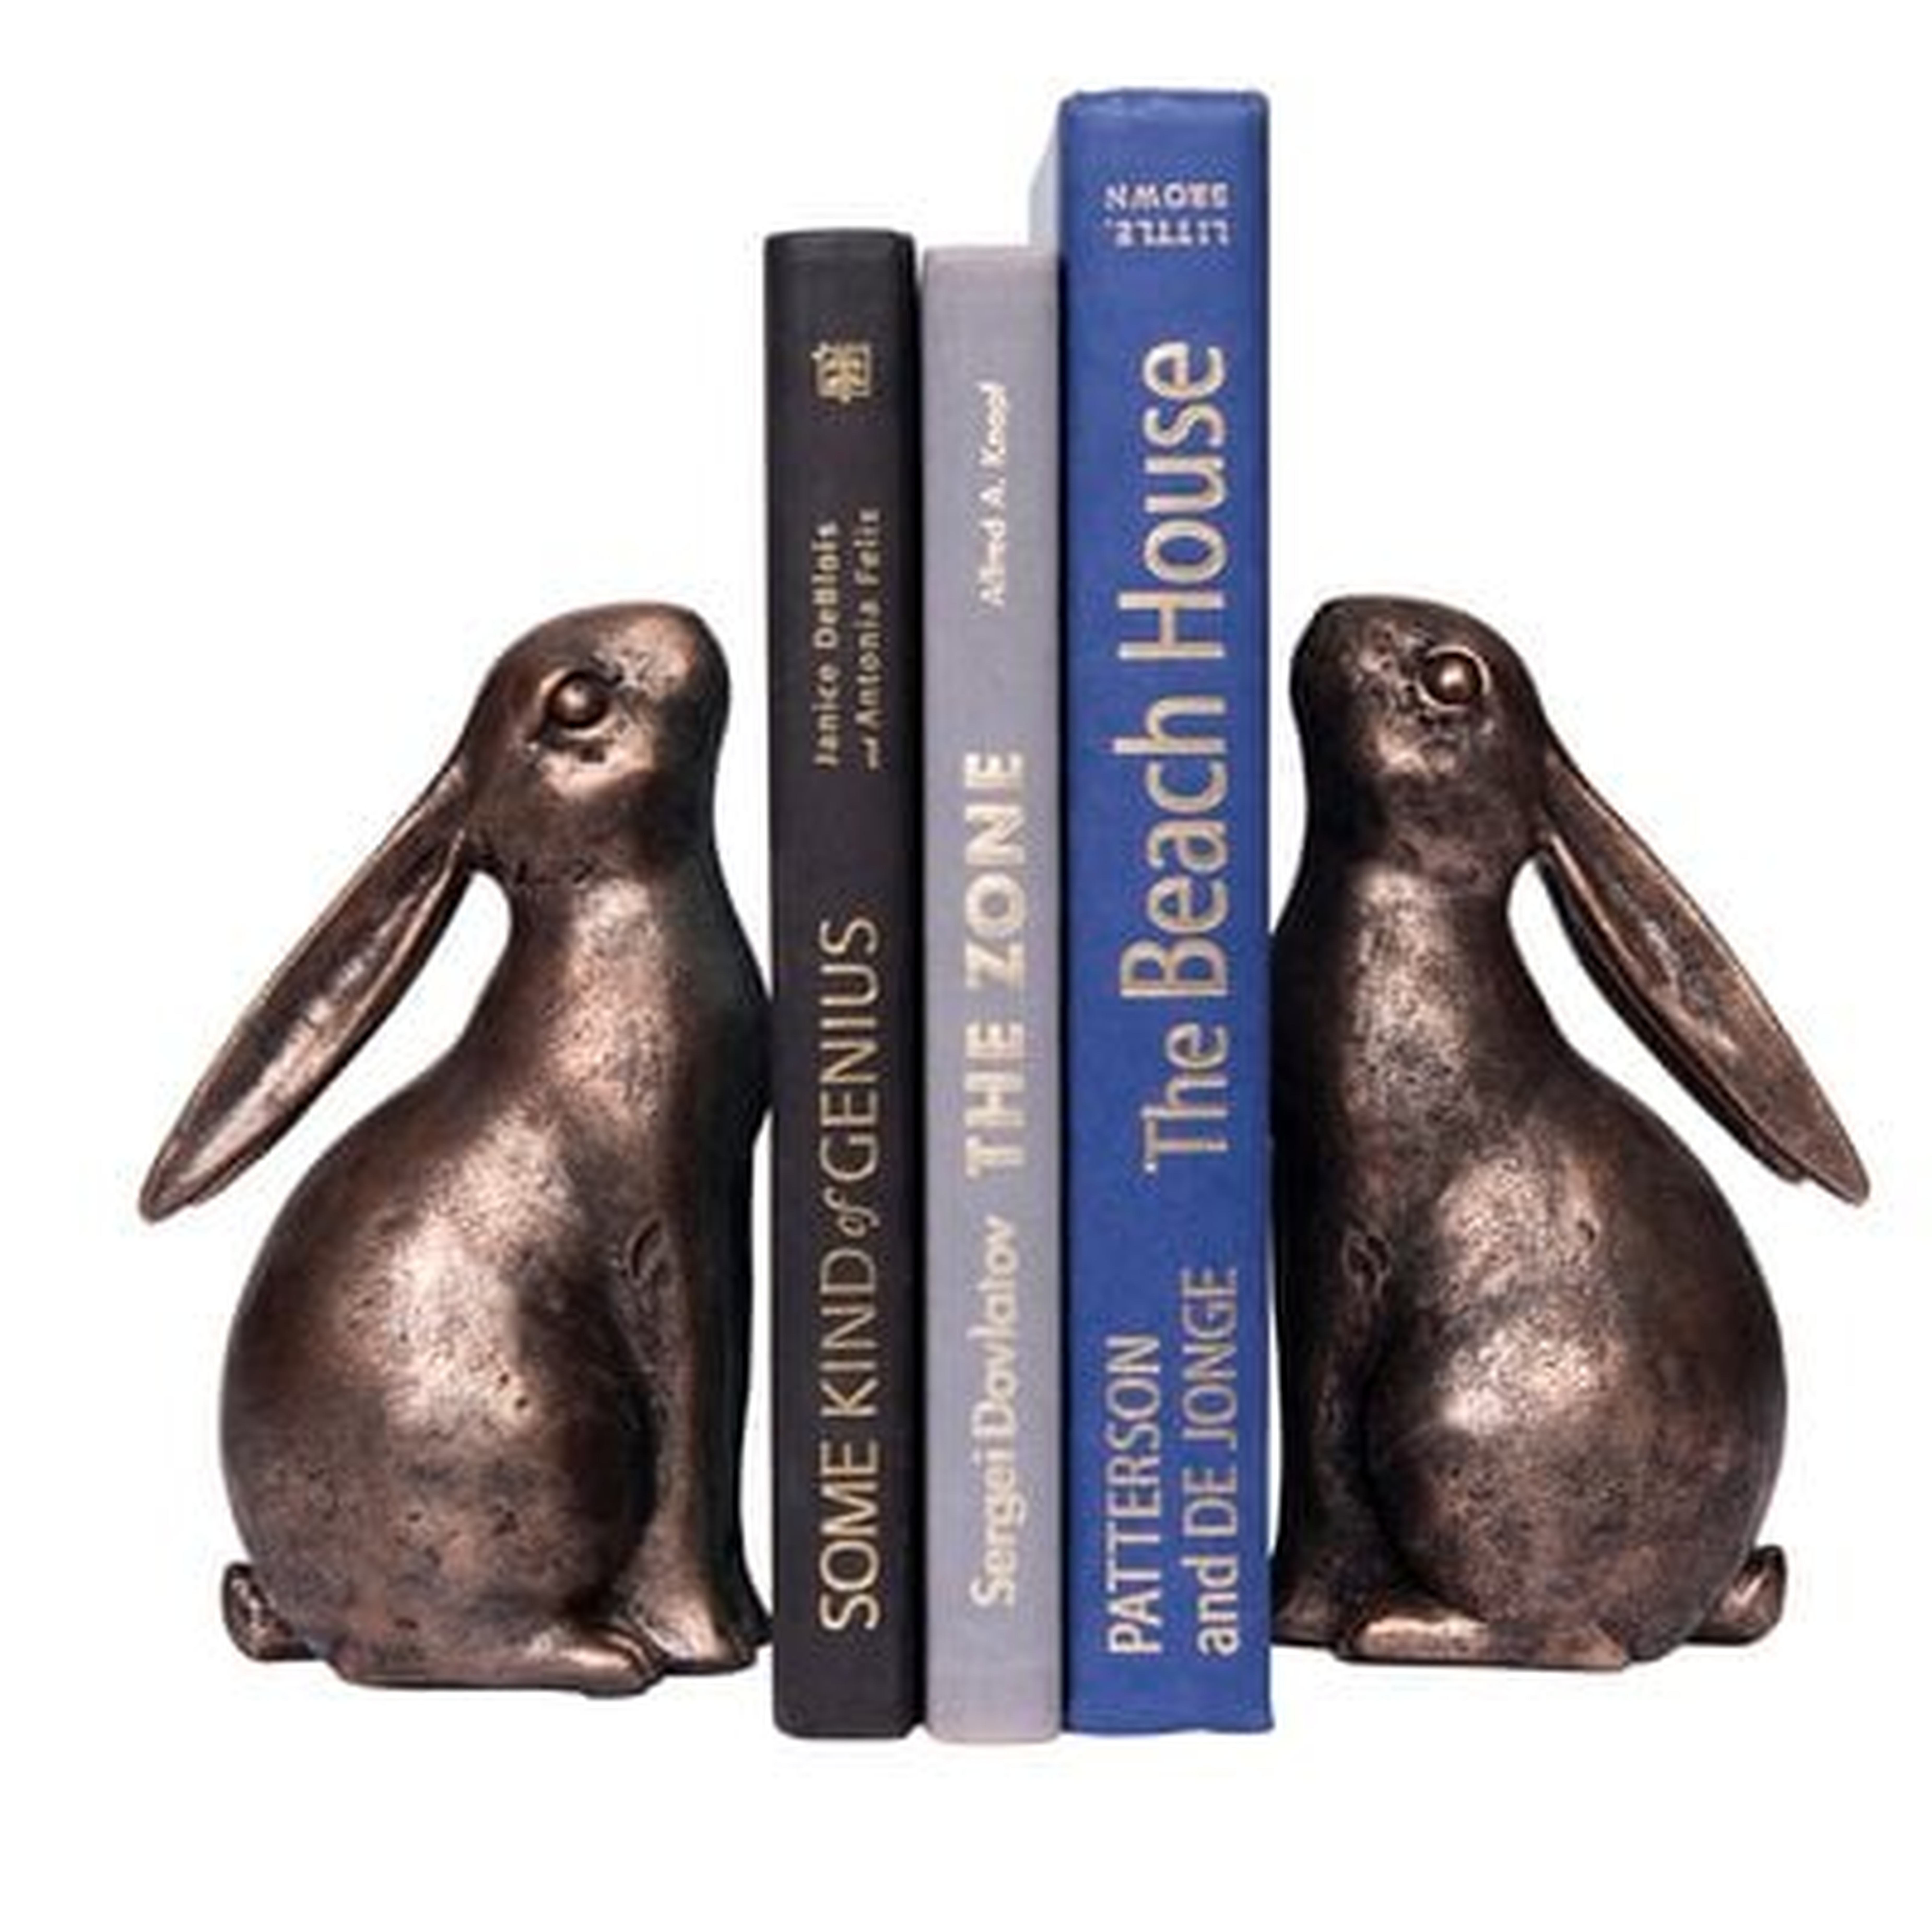 Resin Bunny Shaped Bookends - Birch Lane